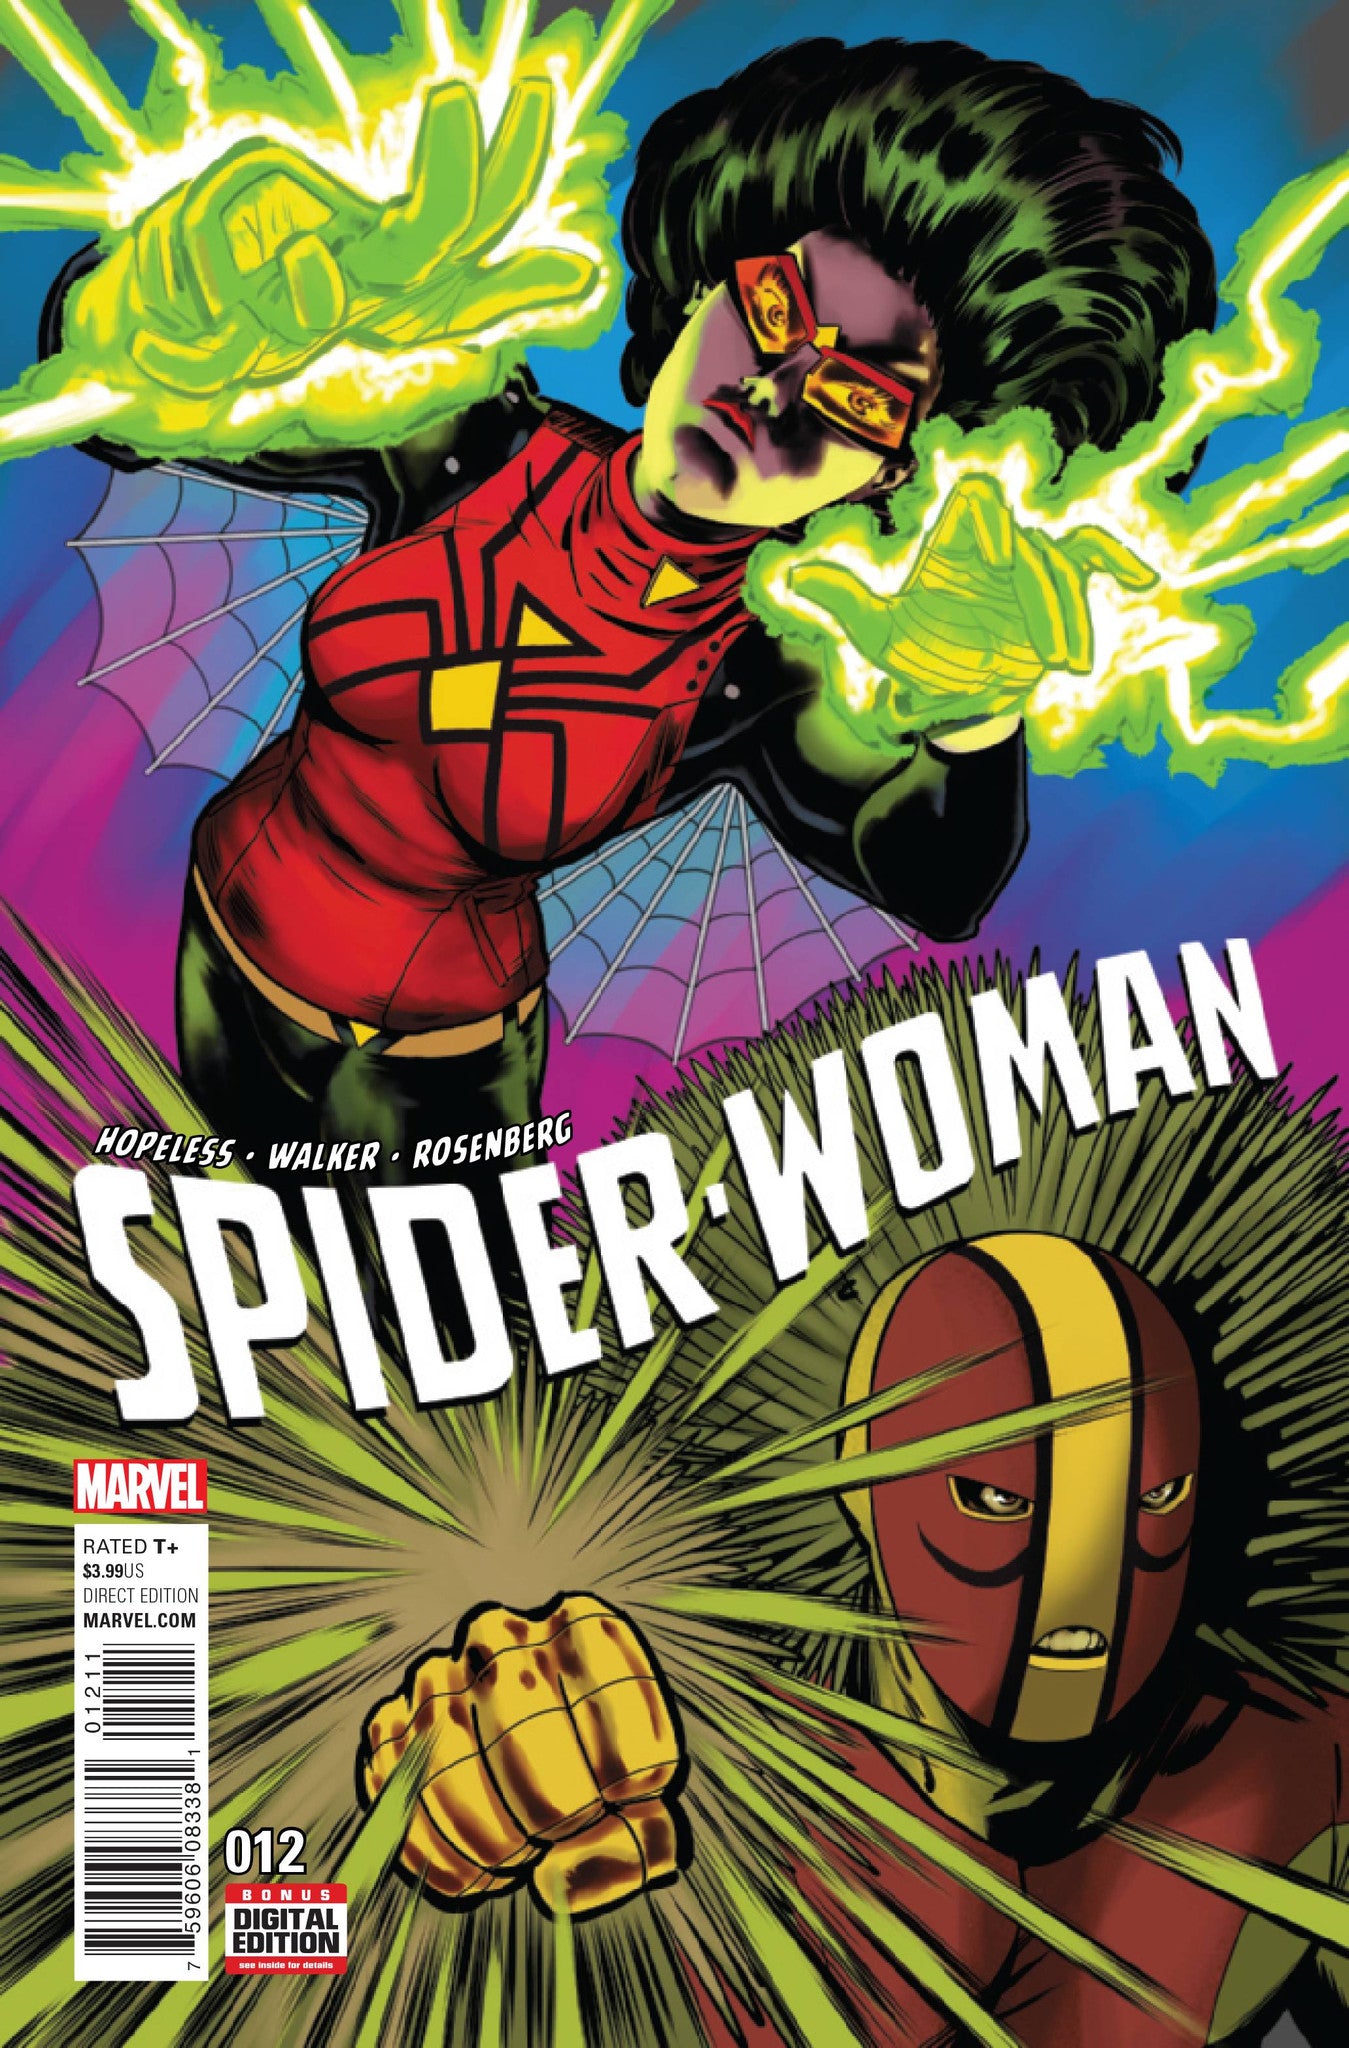 SPIDER-WOMAN #12 COVER